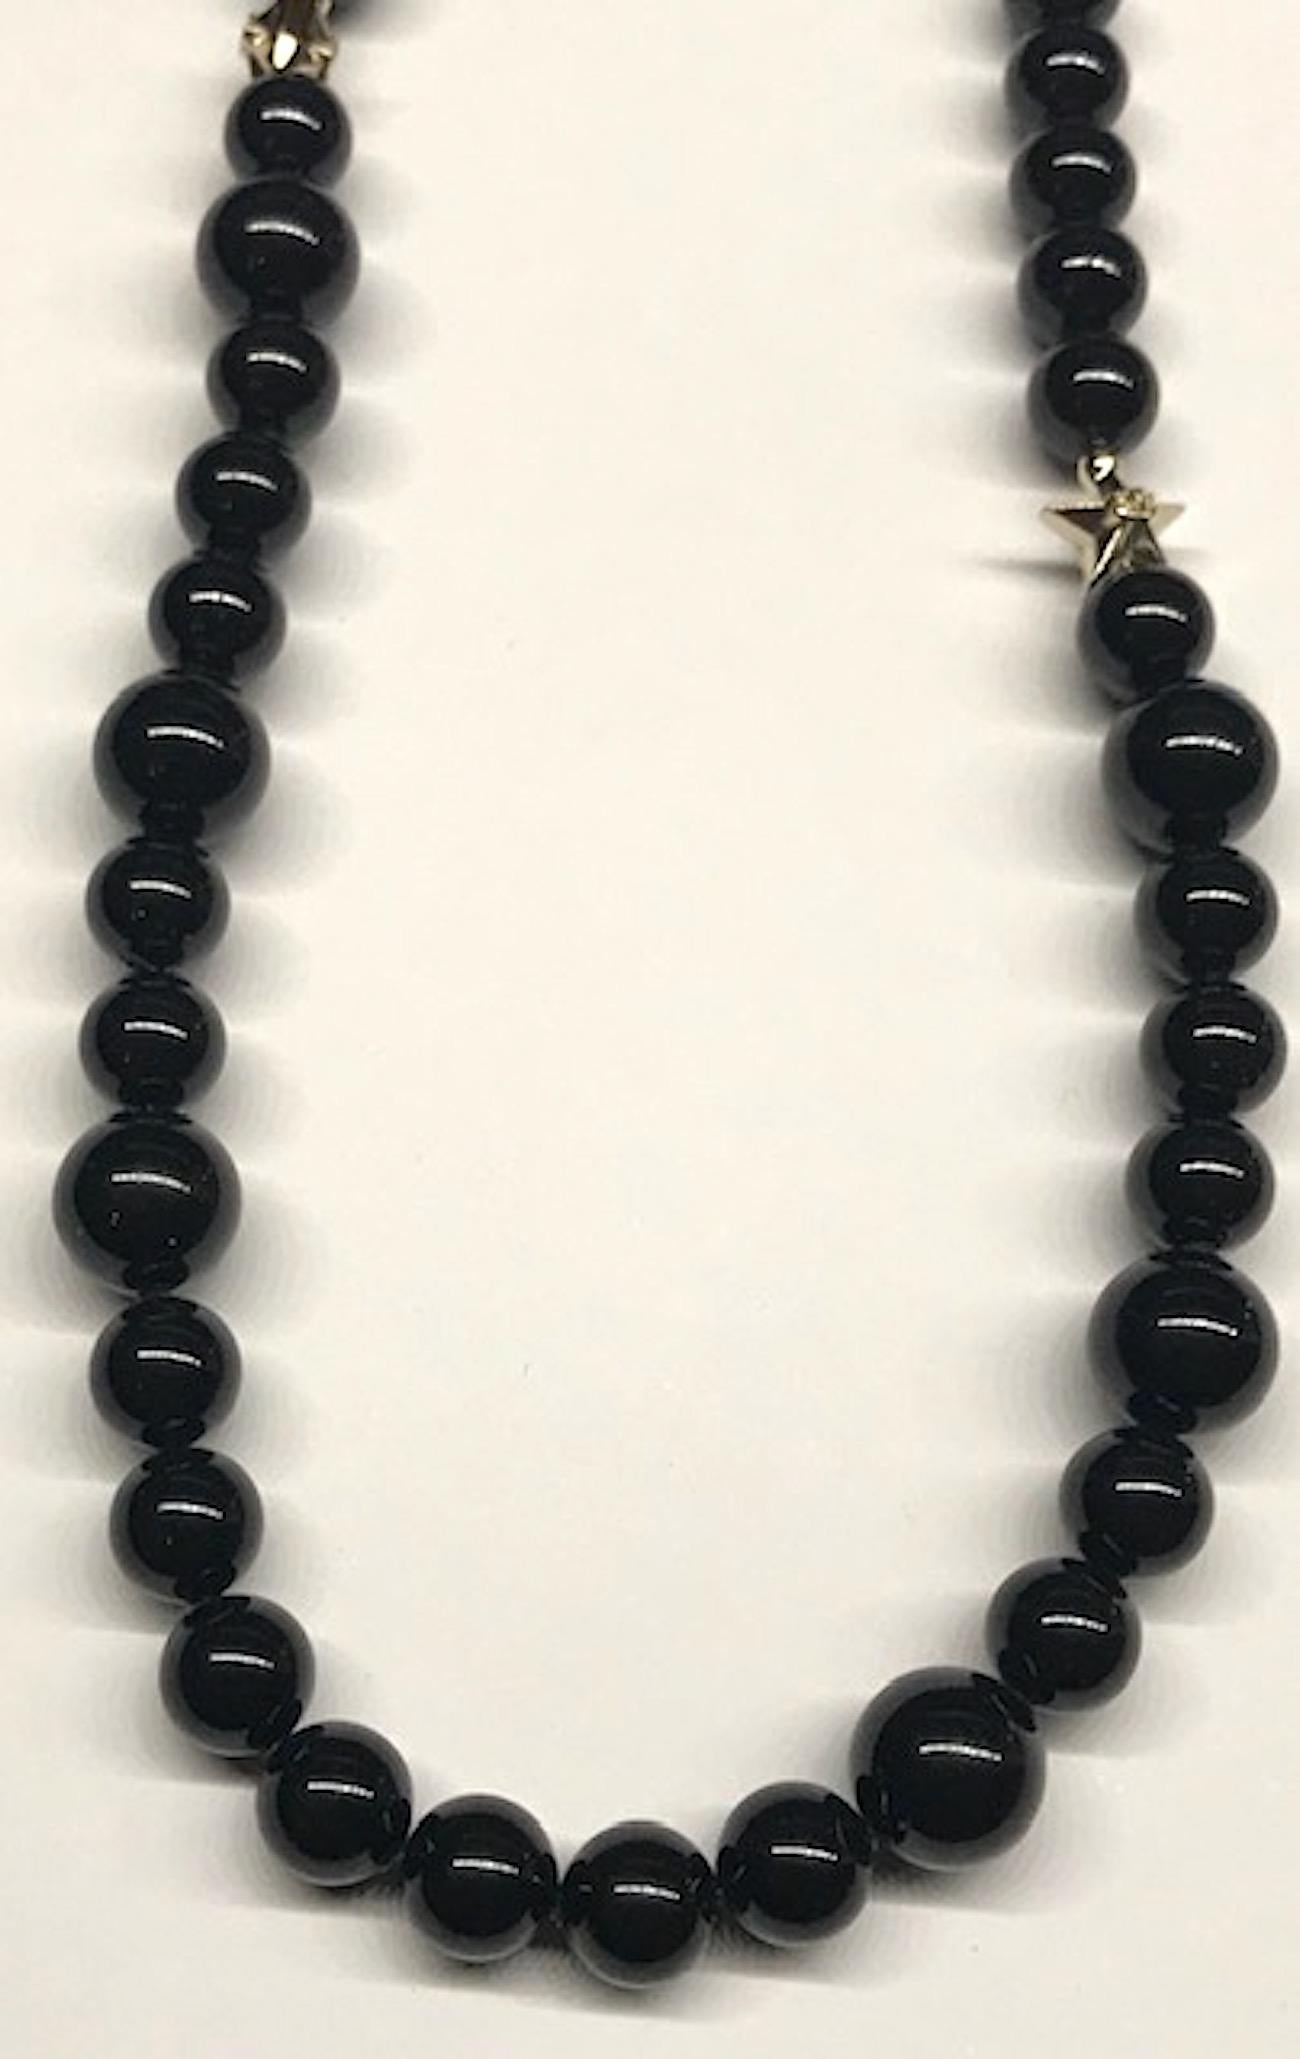 Chanel Long Black Glass Bead & Star Necklace, 2017 Cruise Collection 3